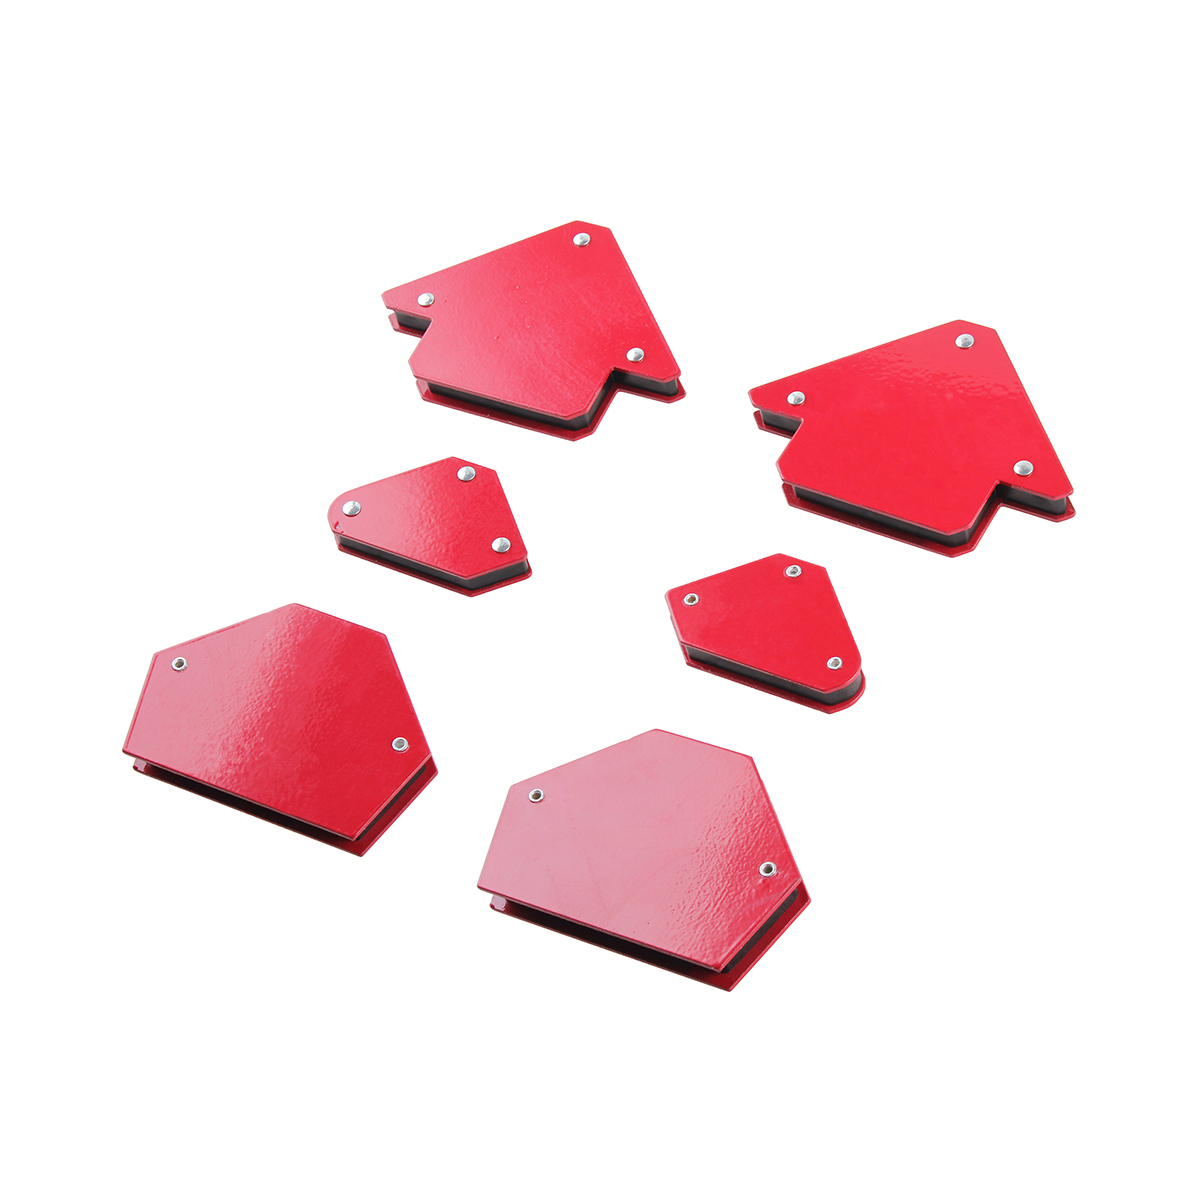 6PCS Welding Magnet Set Welding Positioner Magnetic Fixed Angle Soldering Locator Welding Accessories Hold Metal Part Any Angles